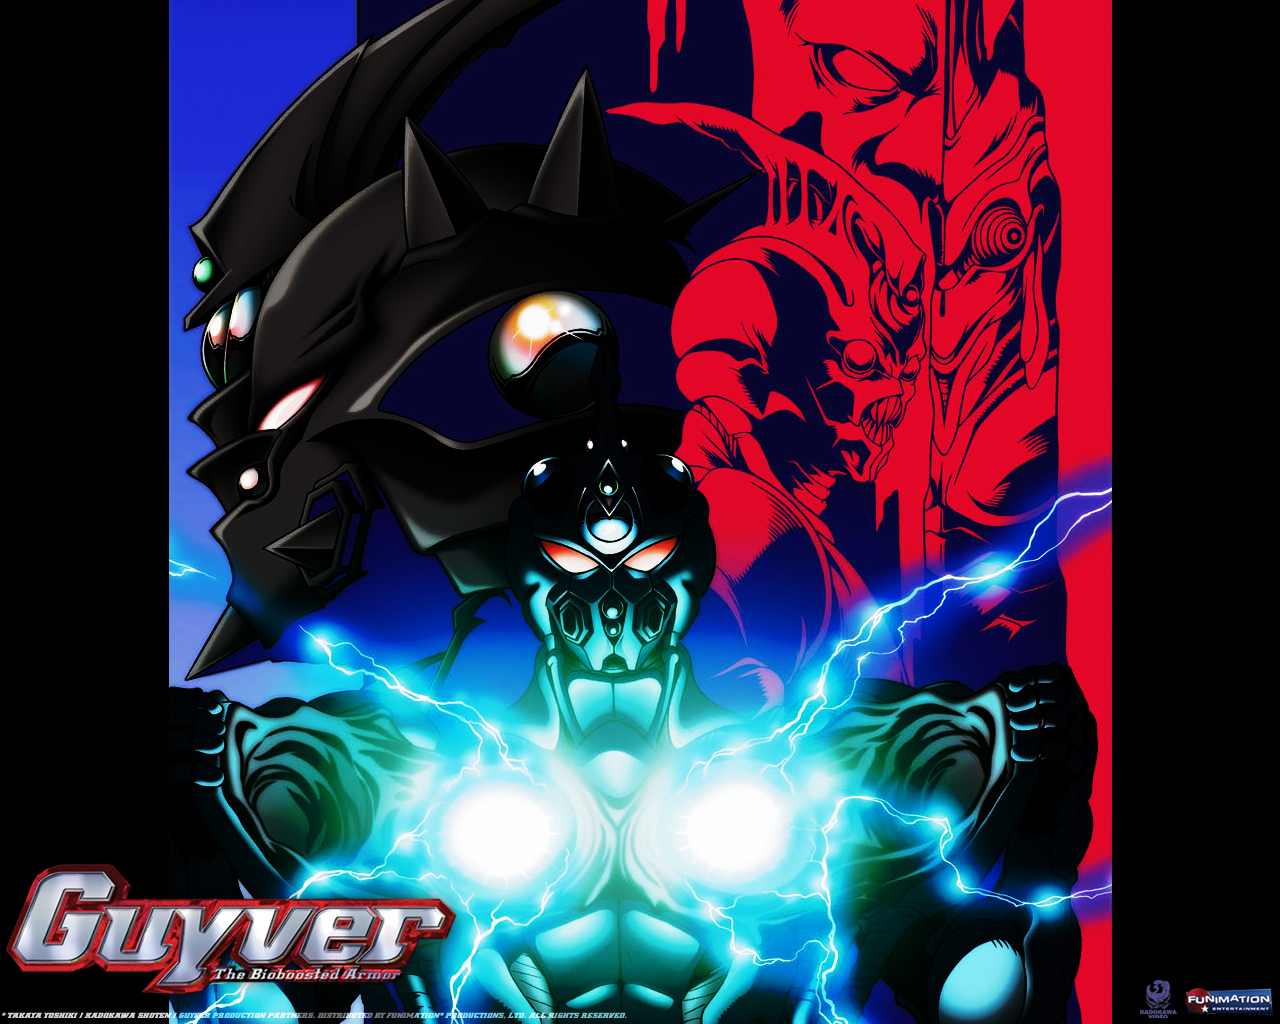  Guyver The Bioboosted Armor Cellphone FHD pic